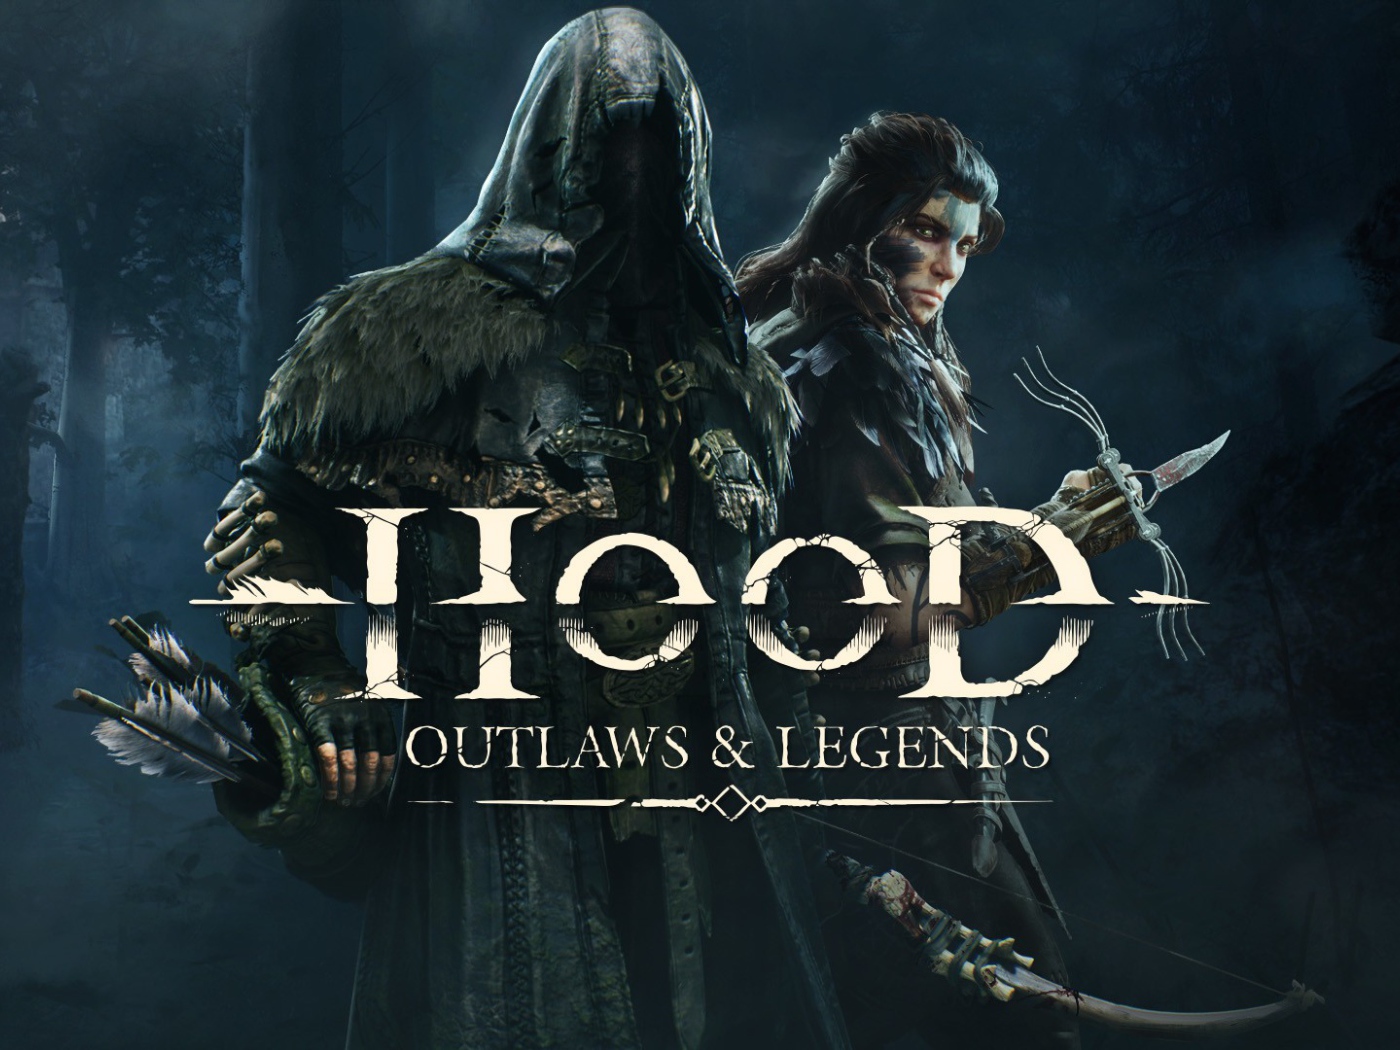 Poster for the new computer game Hood: Outlaws & Legends, 2021